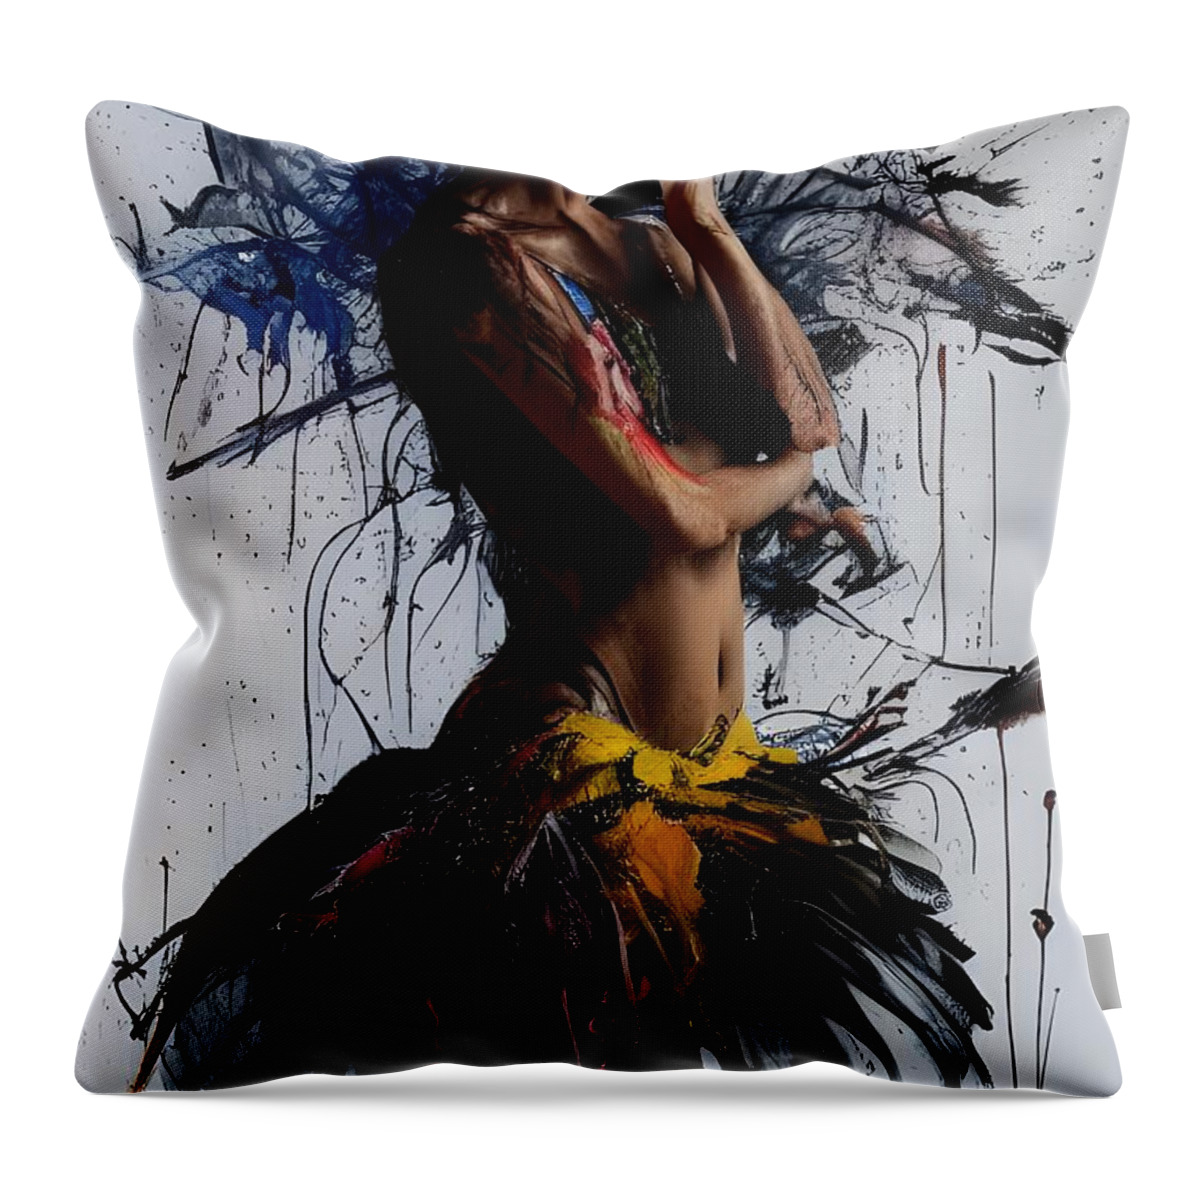 Digital Throw Pillow featuring the digital art Contemplation by Beverly Read